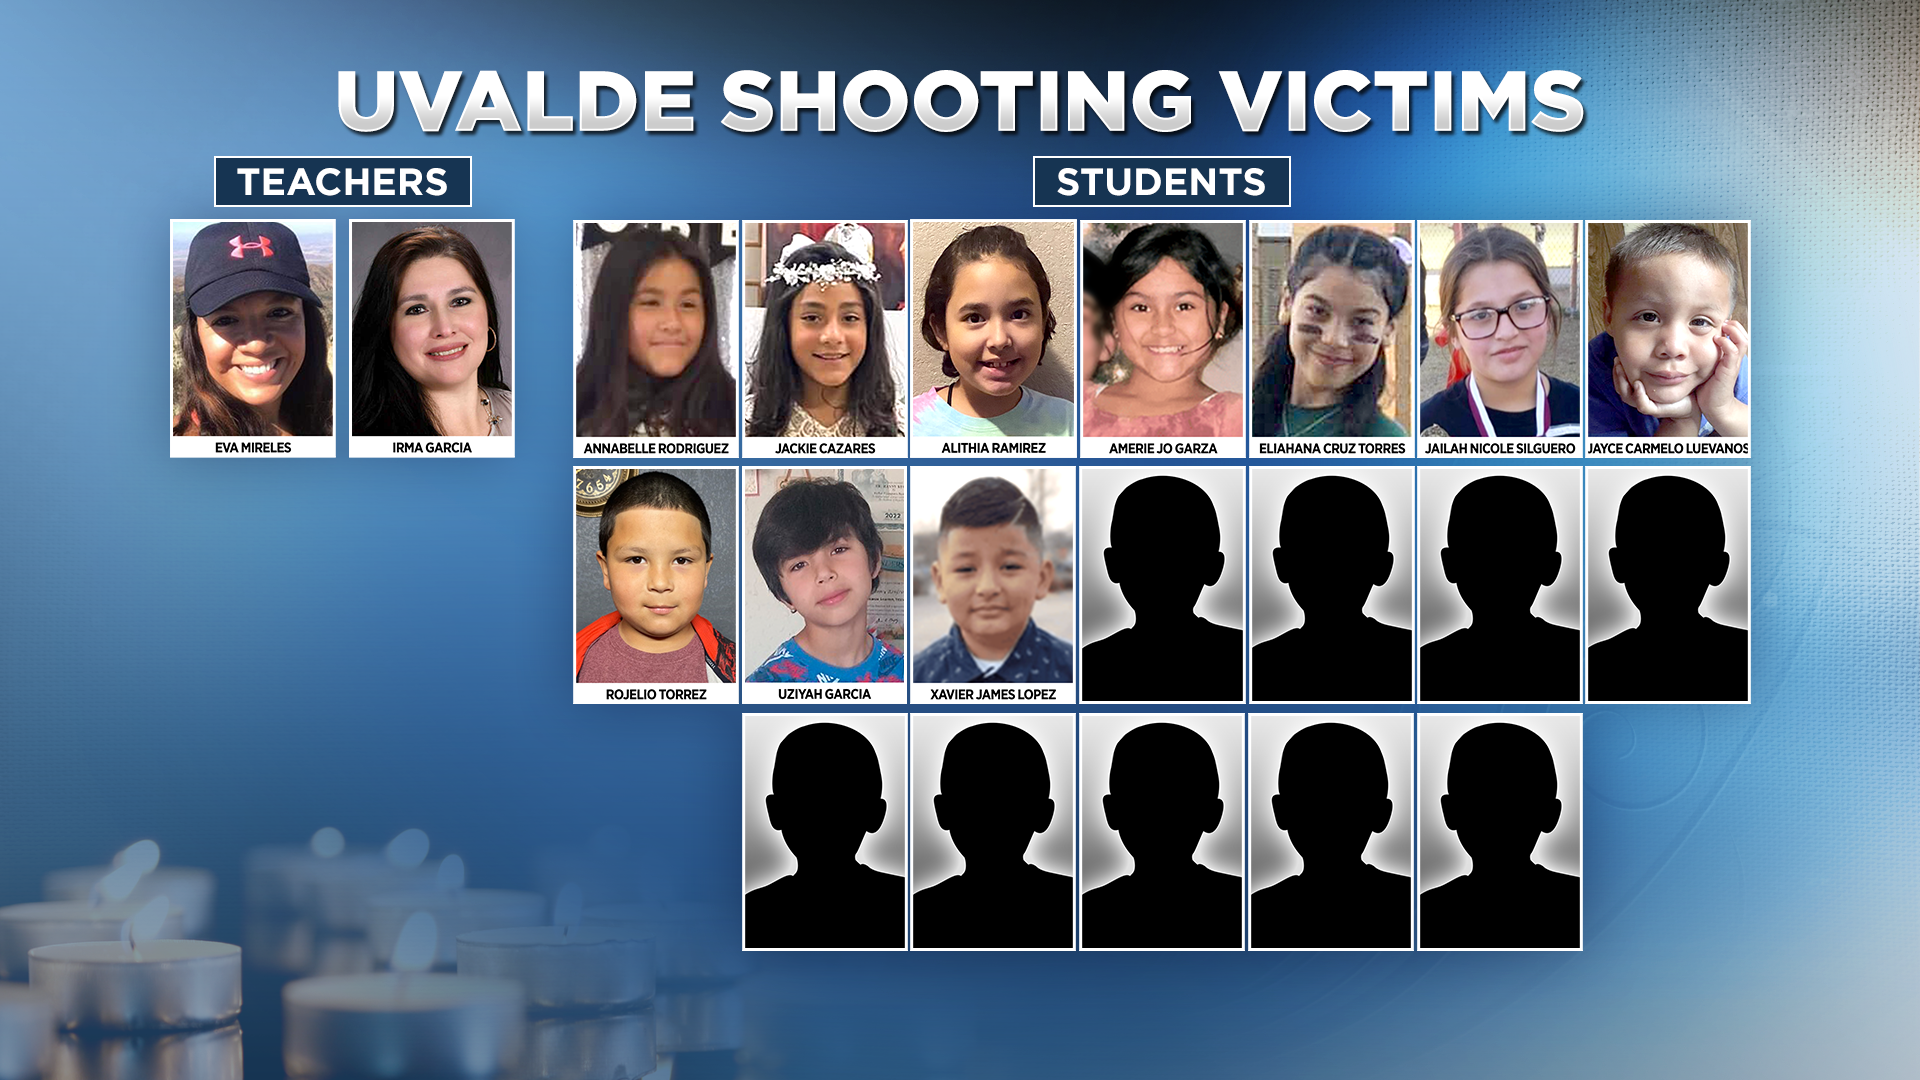 Here's what we know about the Texas elementary school shooting victims